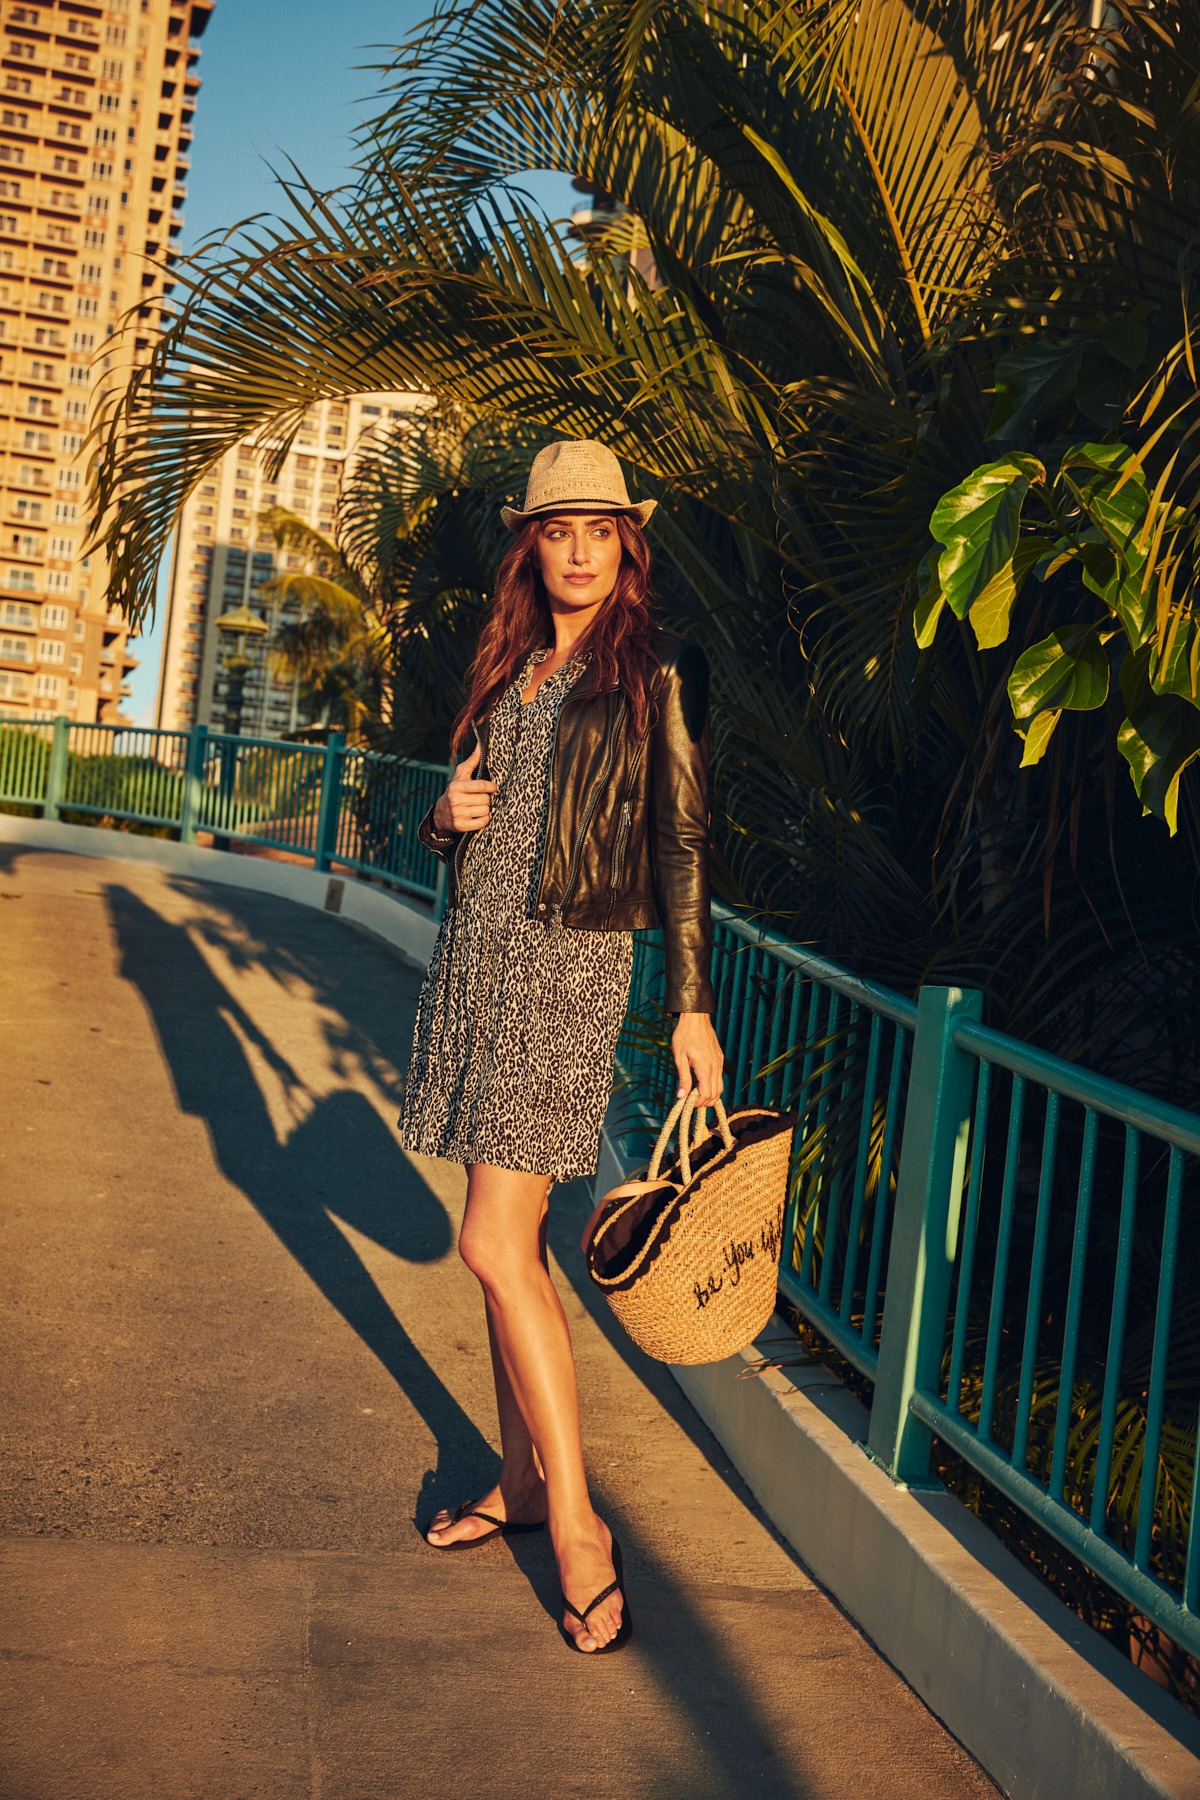 l&t campaign hawaii oahu (76 images) by Mike Meyer Photography